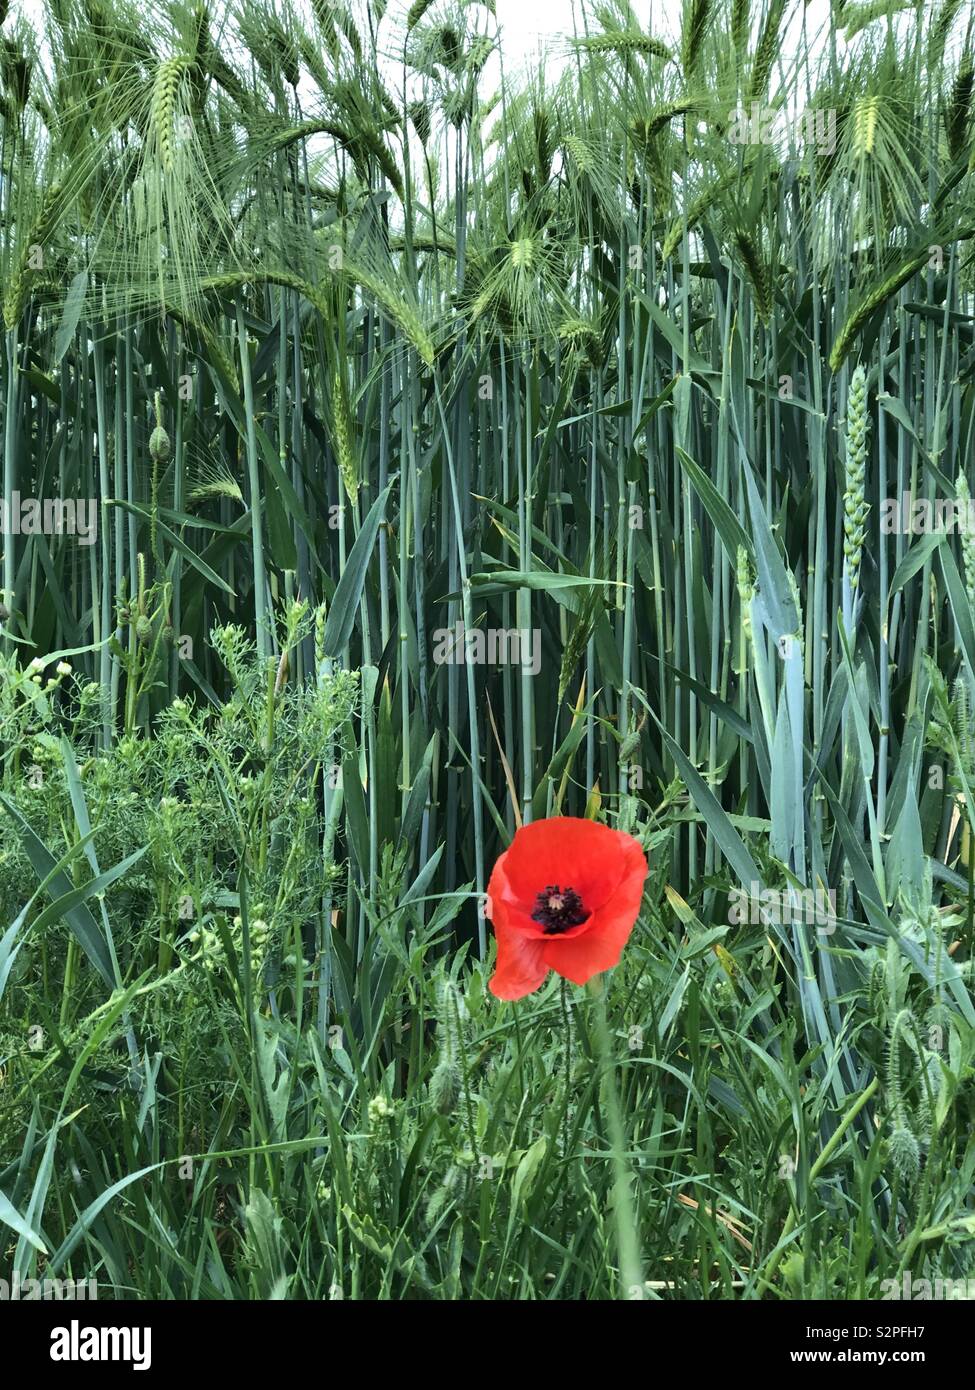 “I will remember”; Red poppy with background of growing winter wheat, Aldbury, Hertfordshire Stock Photo